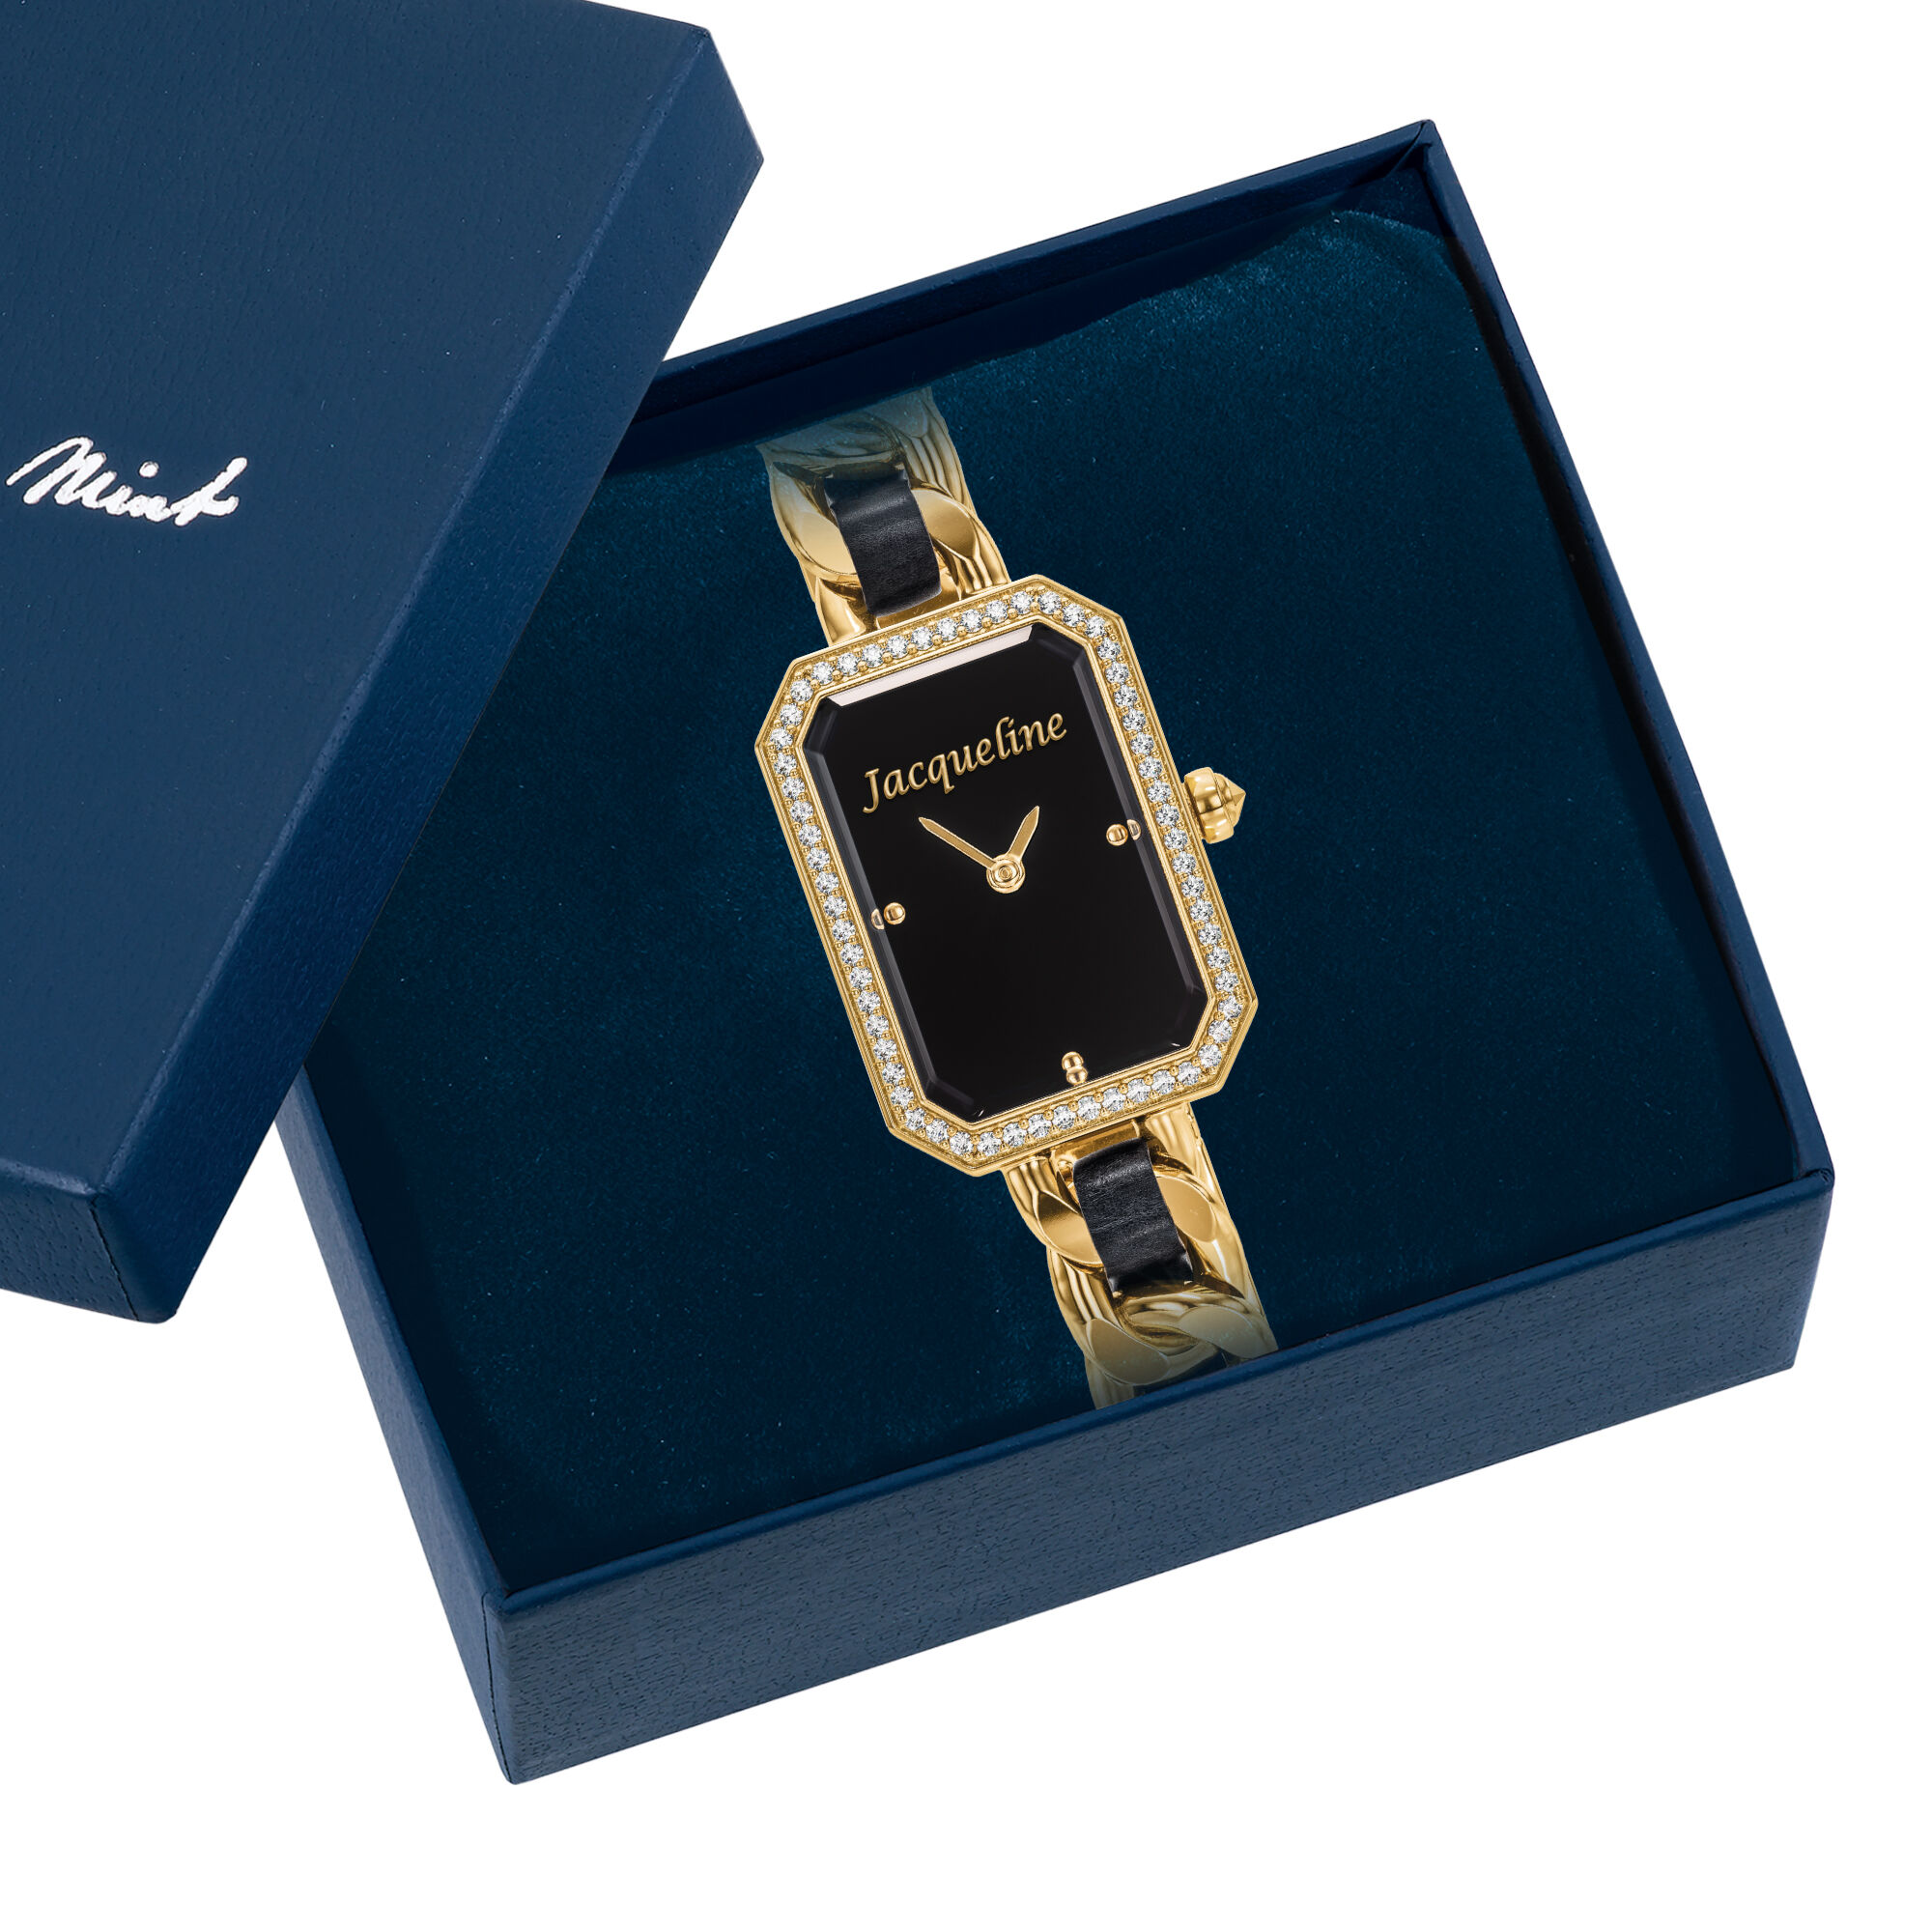 Personalized Black Gold Watch 10816 0011 g display box